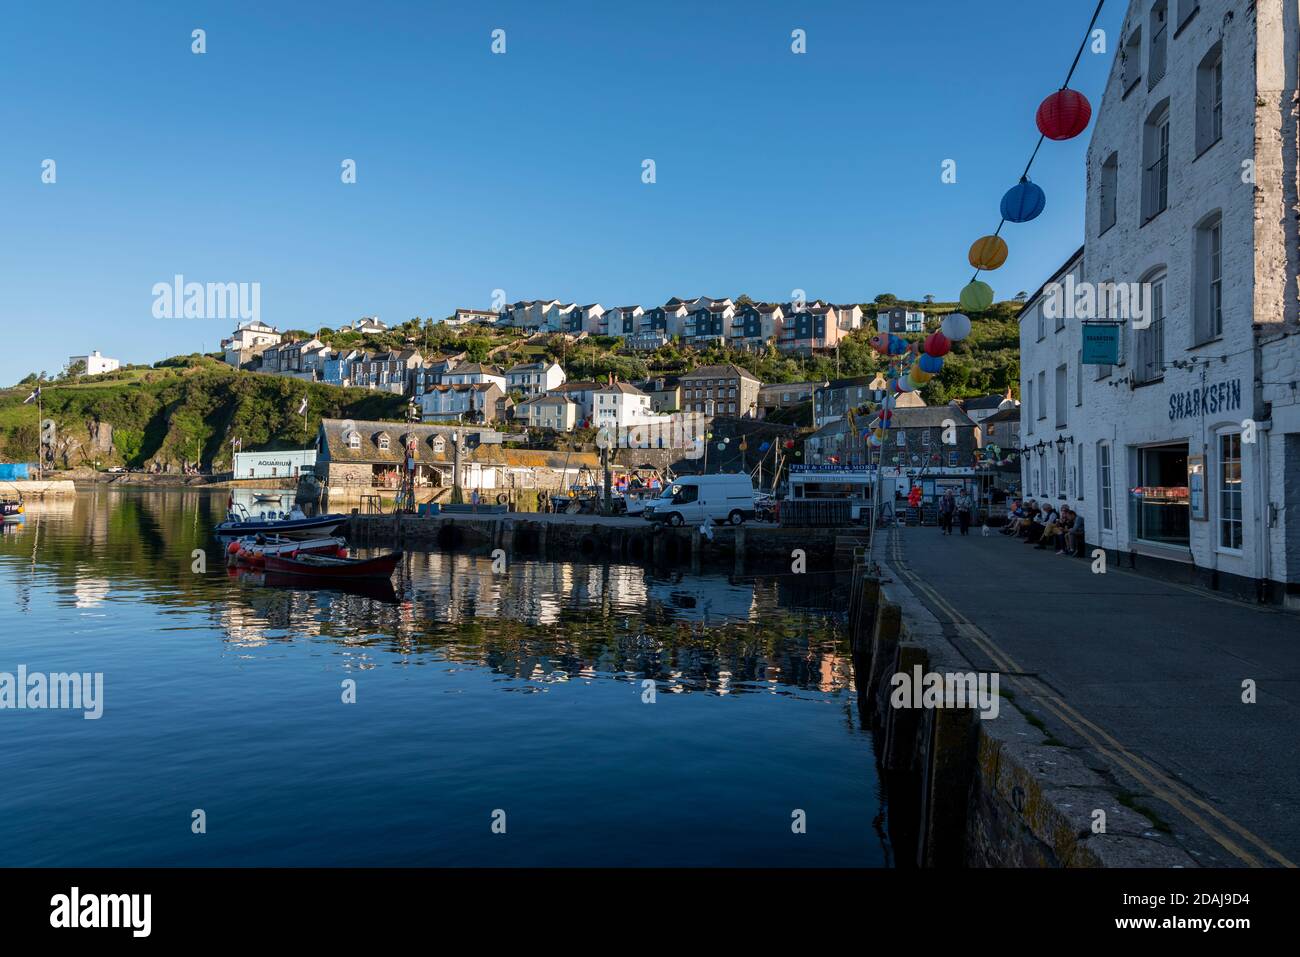 Boote in Mevagissey Harbour, Cornwall, UK Stockfoto